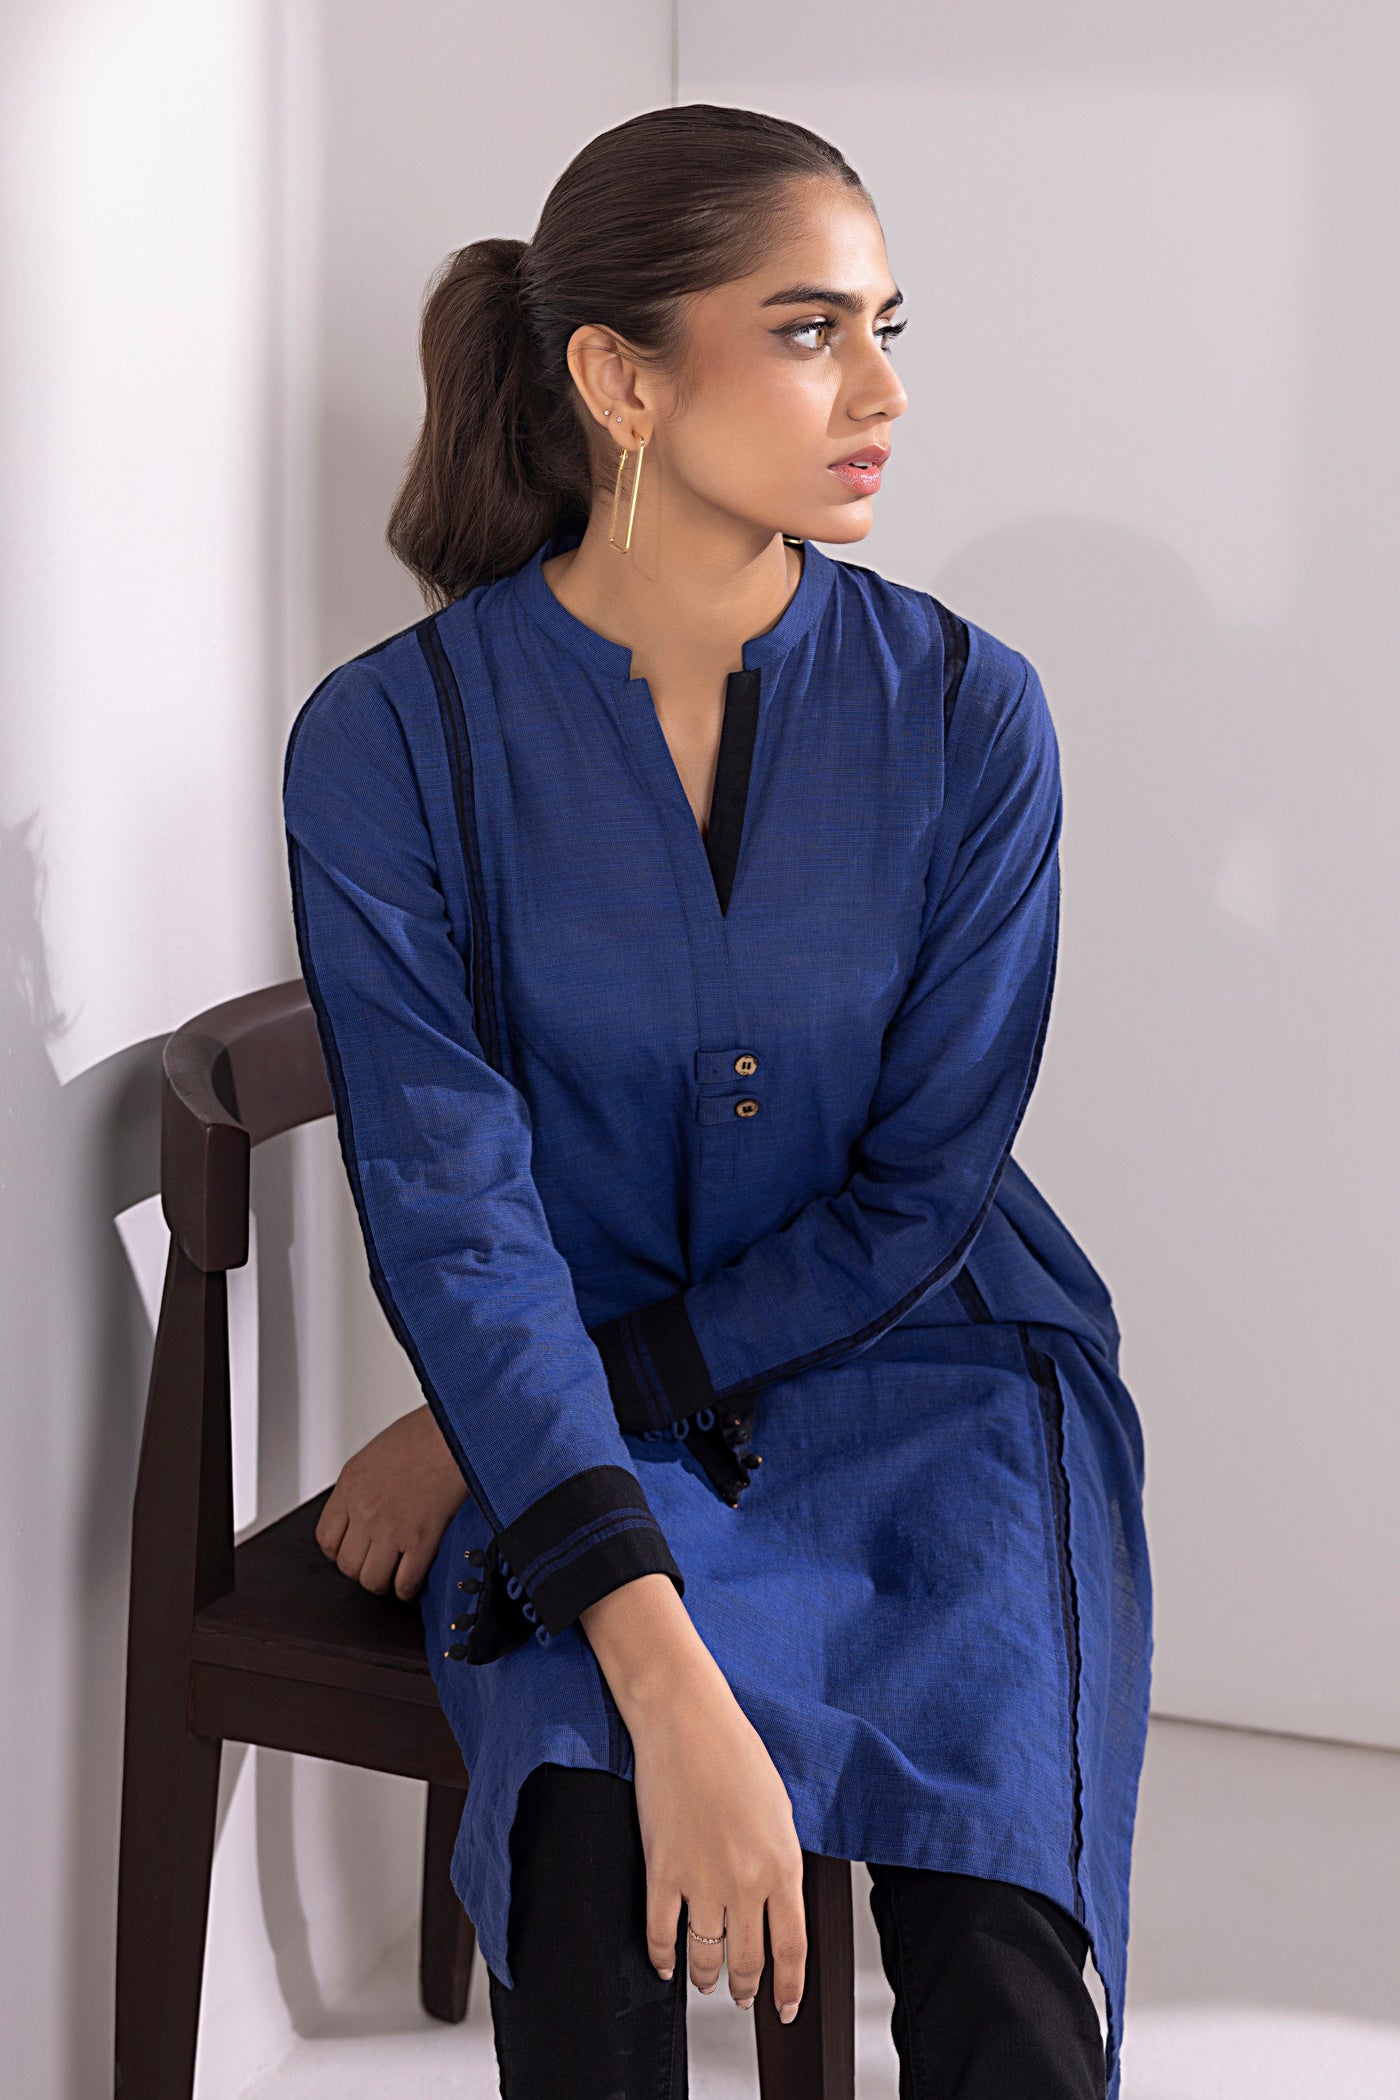 Lakhany 01 Piece Ready to Wear Yarn Dyed Cotton Embroidered Shirt - LG-UB-043